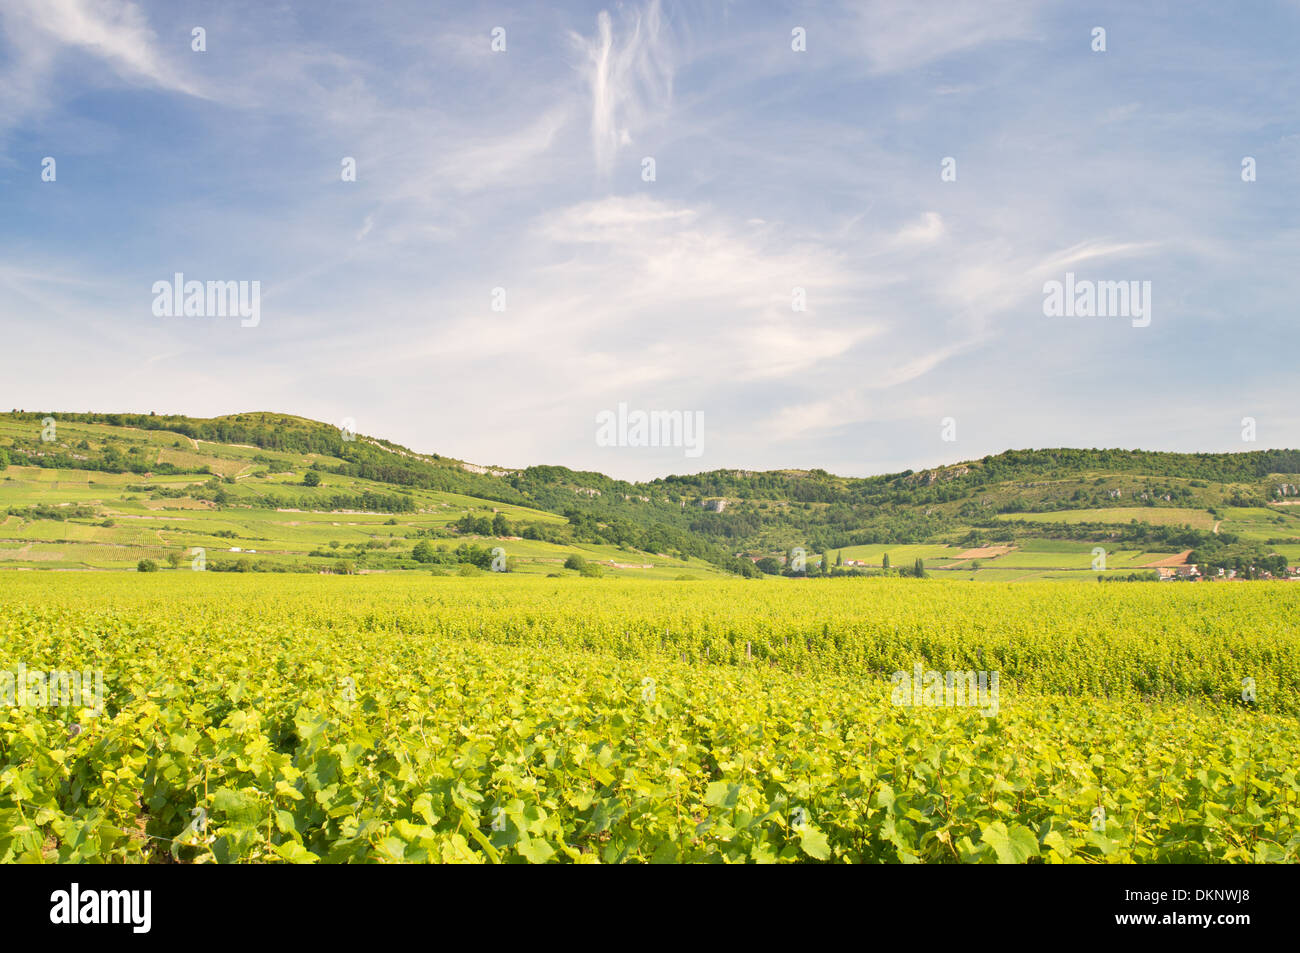 Vineyard in early summer beneath blue sky with wispy clouds, near Santenay, France, Europe Stock Photo